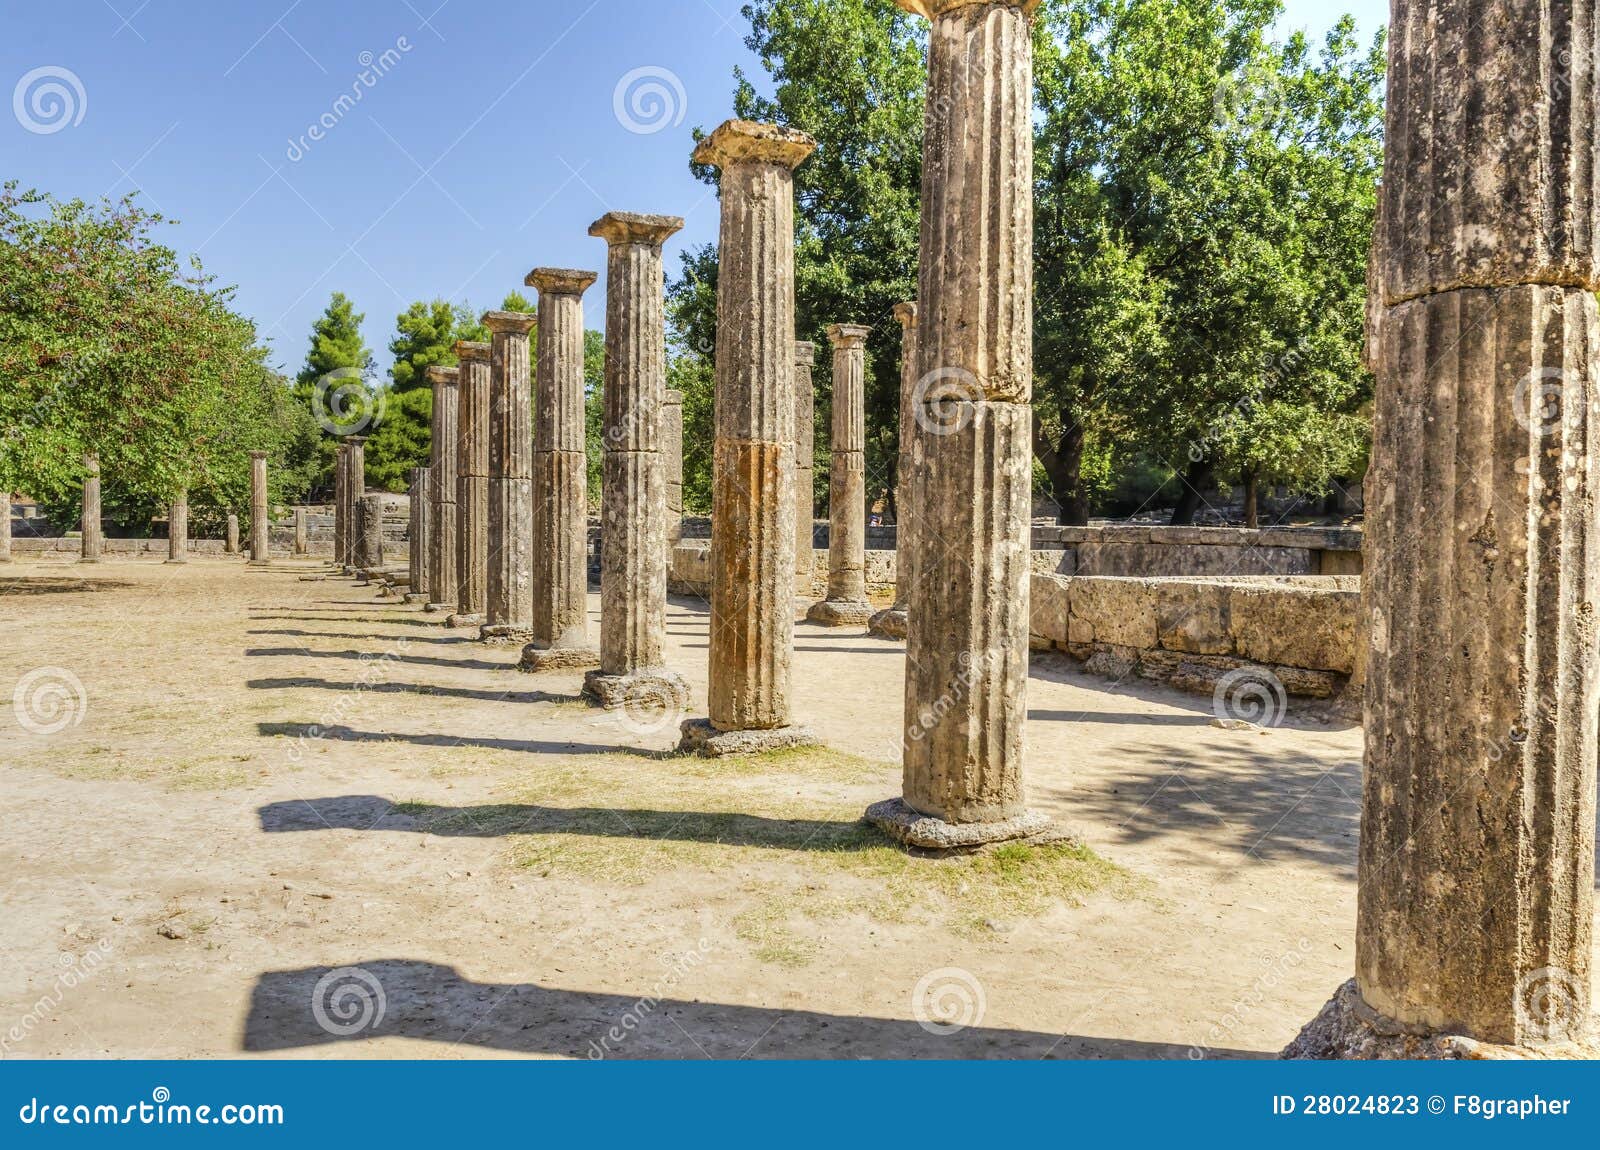 ancient site of olympia, greece